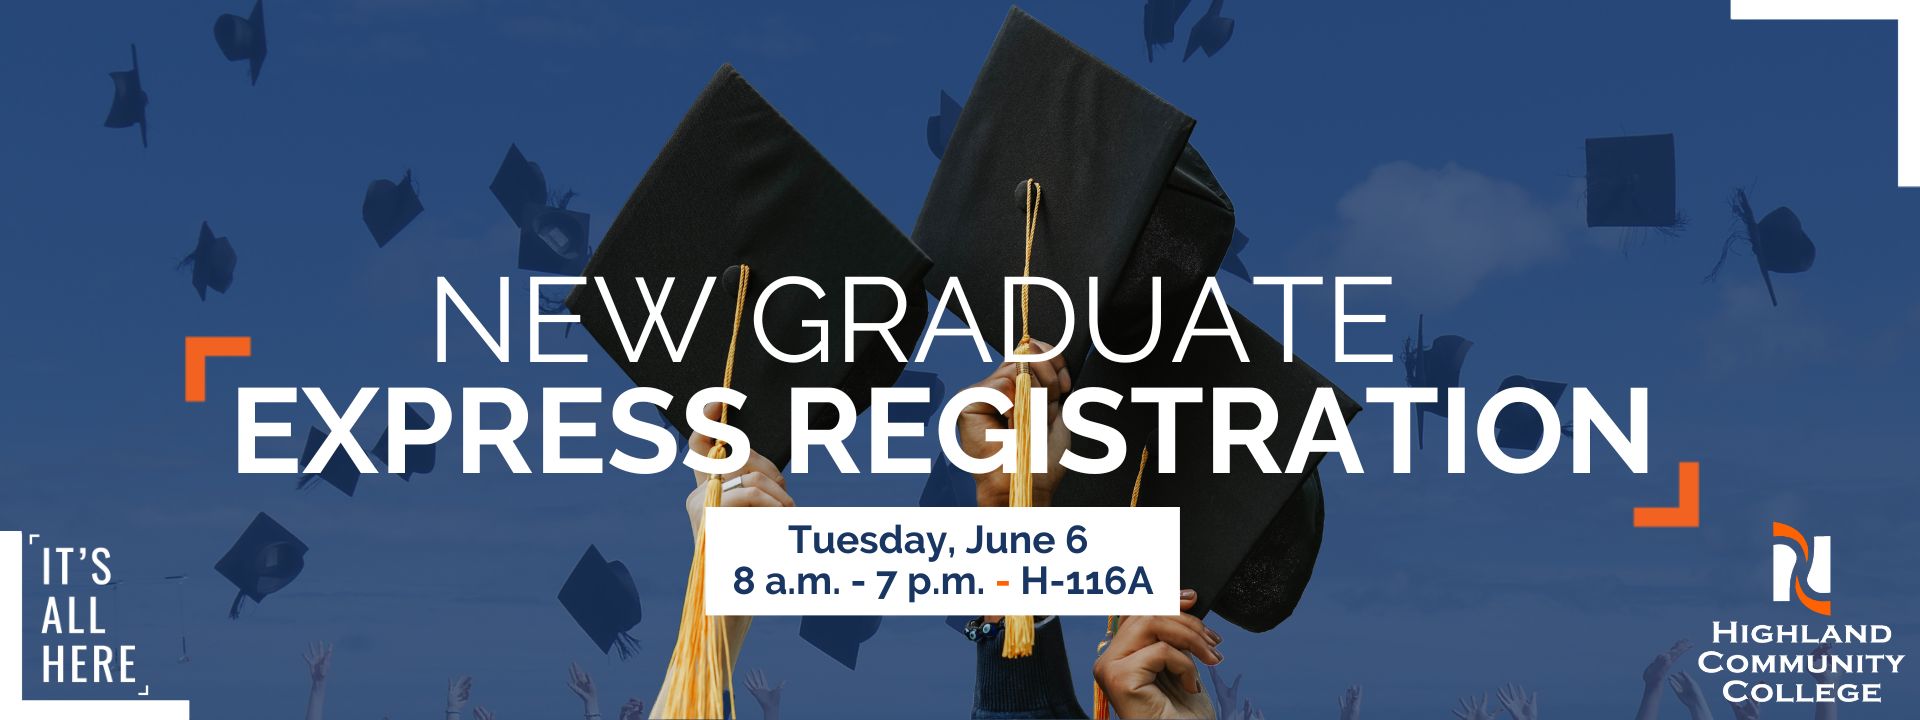 New graduate express registration is Tuesday, June 6 from 8 am to 7 pm in H-116A. Three hands hold up graduation caps in front of a background of tossed caps in the photo space. The It's All Here and HCC logos sit in the bottom corners with white snap shot brackets